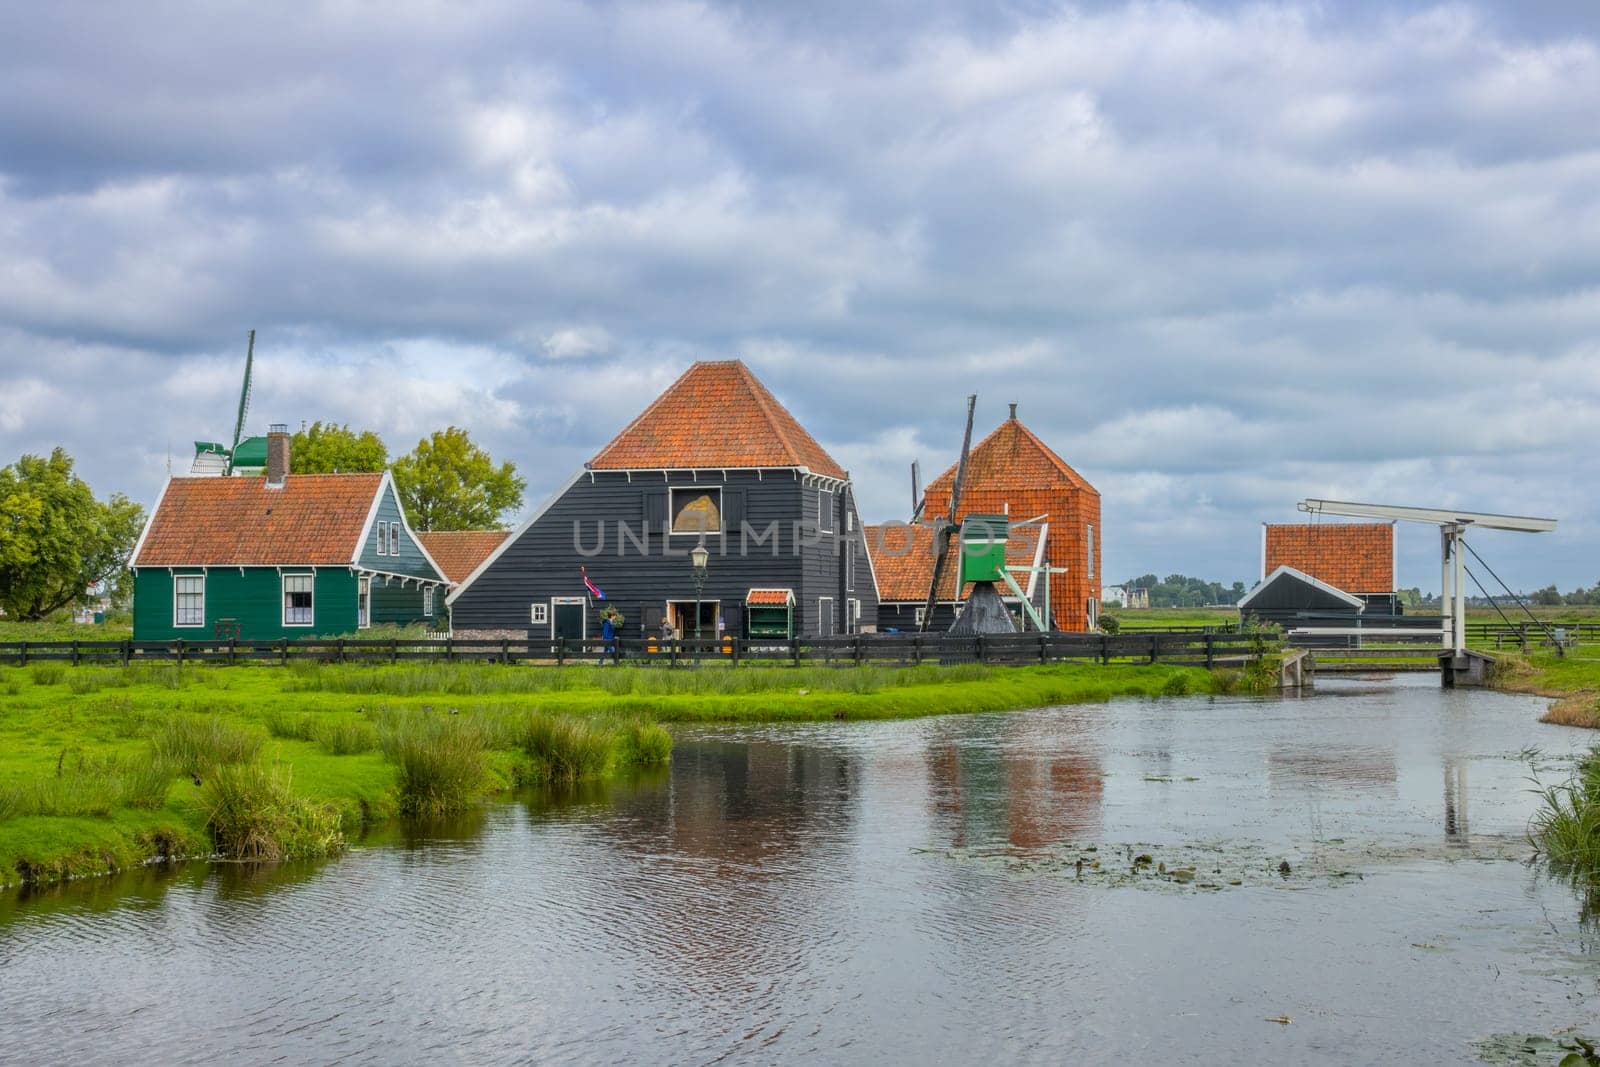 Netherlands. Cloudy summer day in the ancient Zaanse Schans. Several traditional rural houses and a grain barn